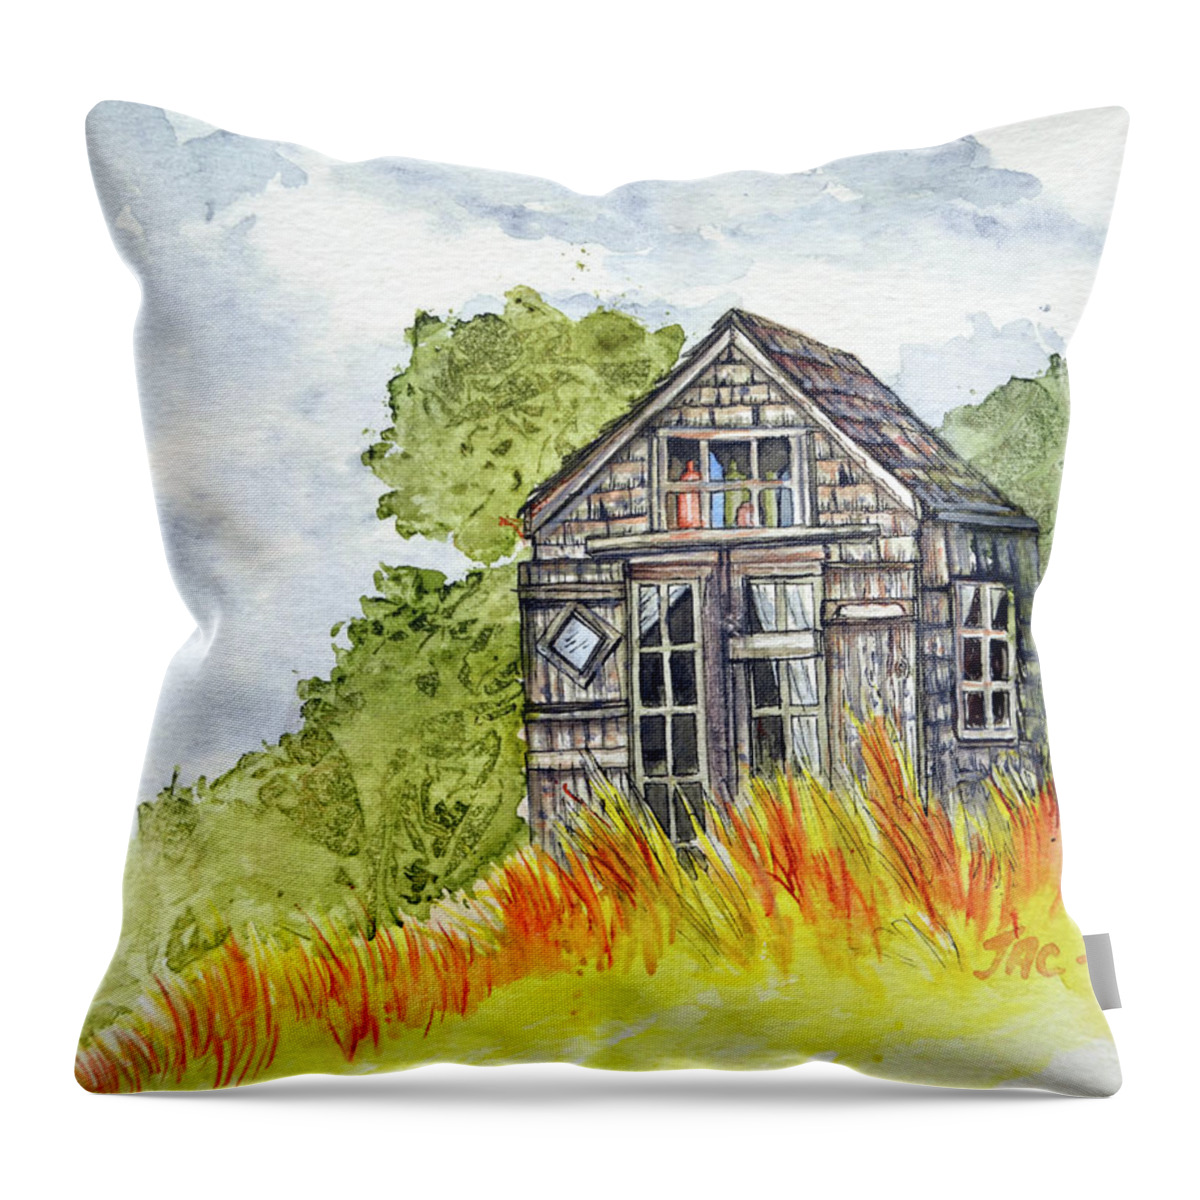 Dune Throw Pillow featuring the painting Dune Shack by Jennifer Creech